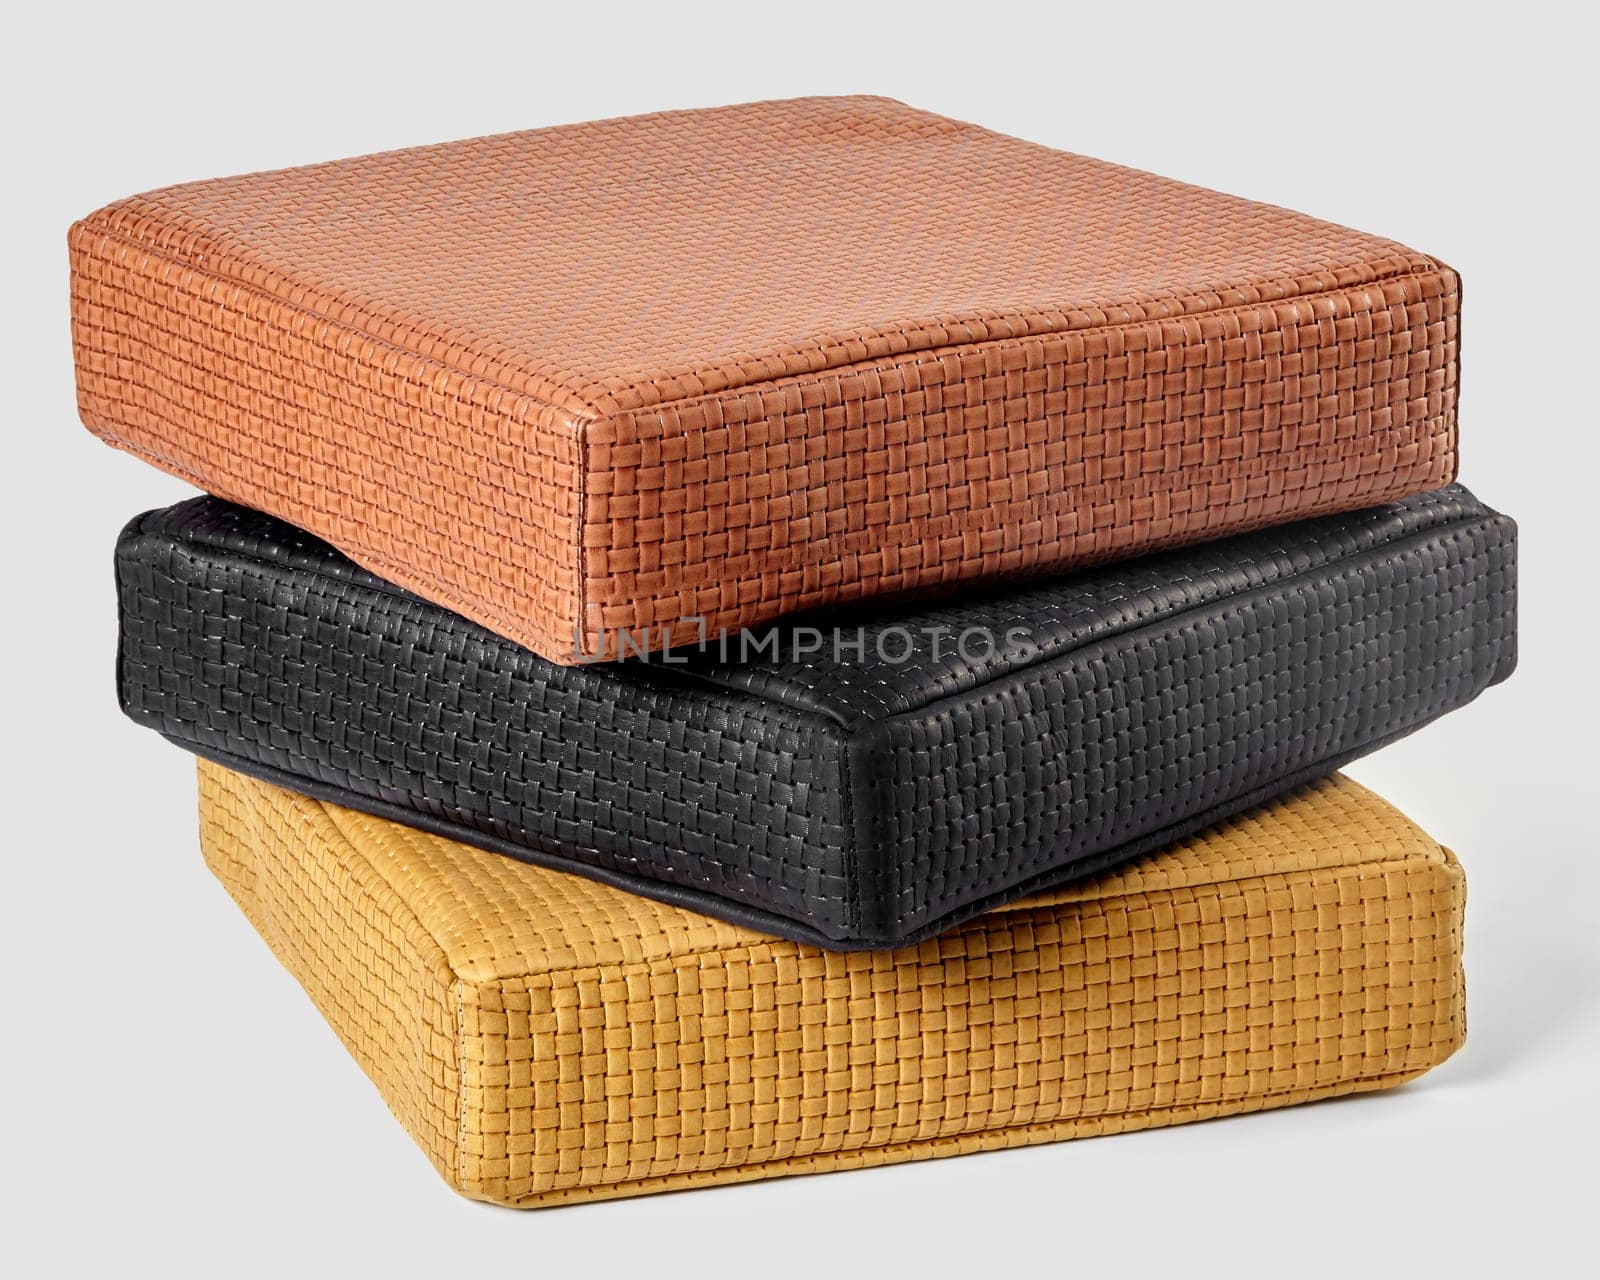 Elegantly stacked leather cushions with woven texture in shades of tan, black, and yellow. Artisanal accessories offering comfort and sophistication to interior